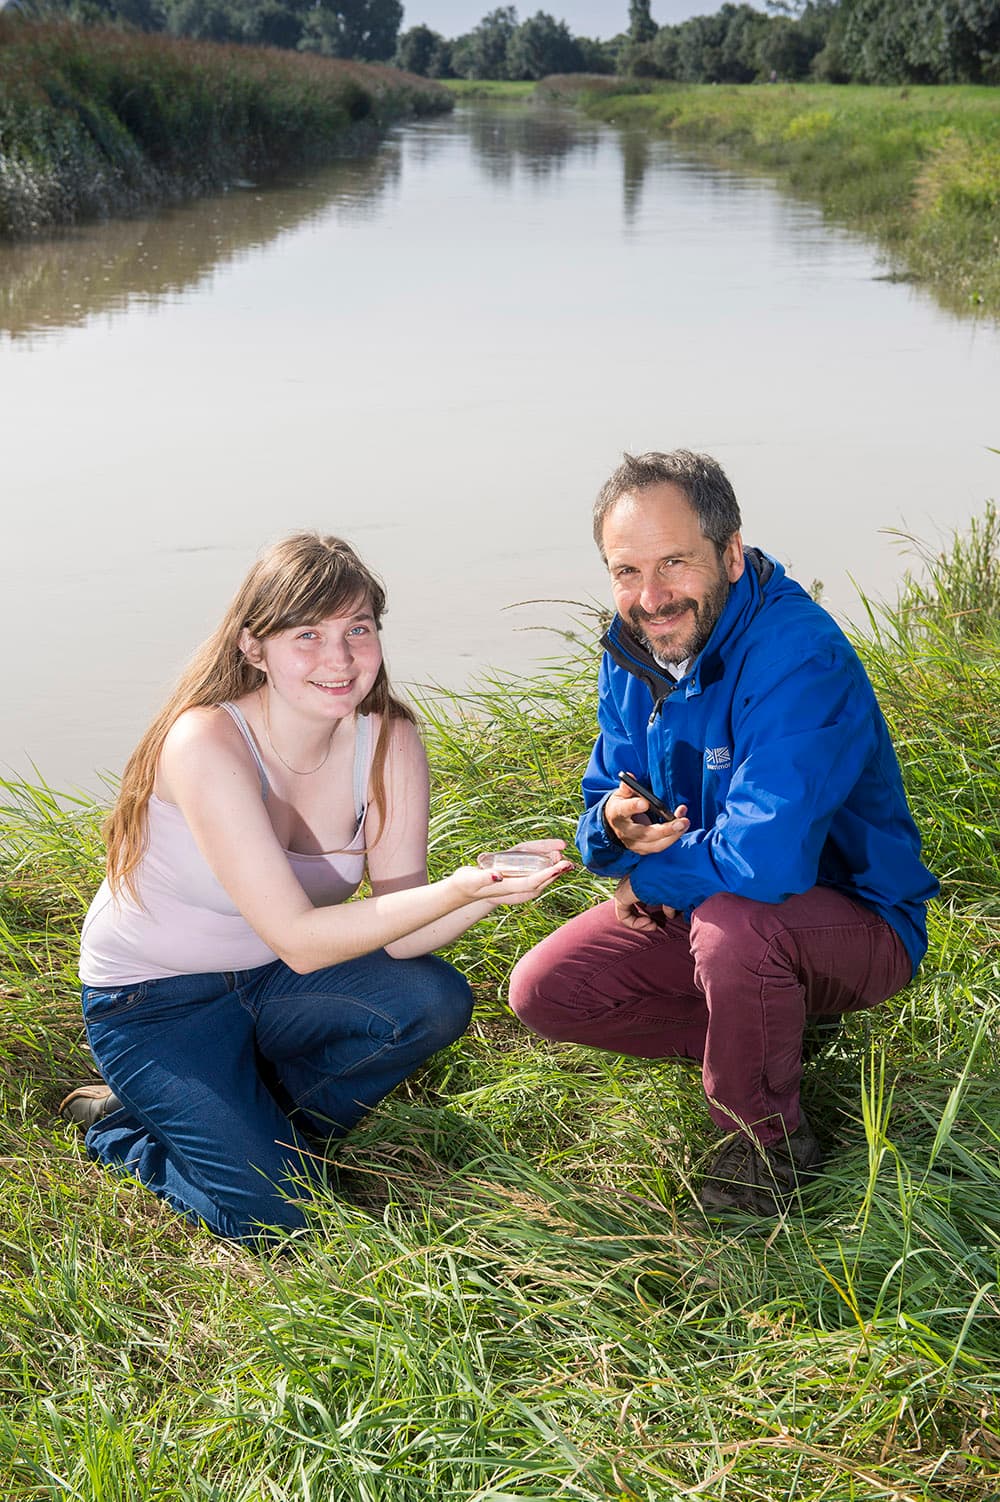 Army of citizen scientists help sample hundreds of miles of waterways